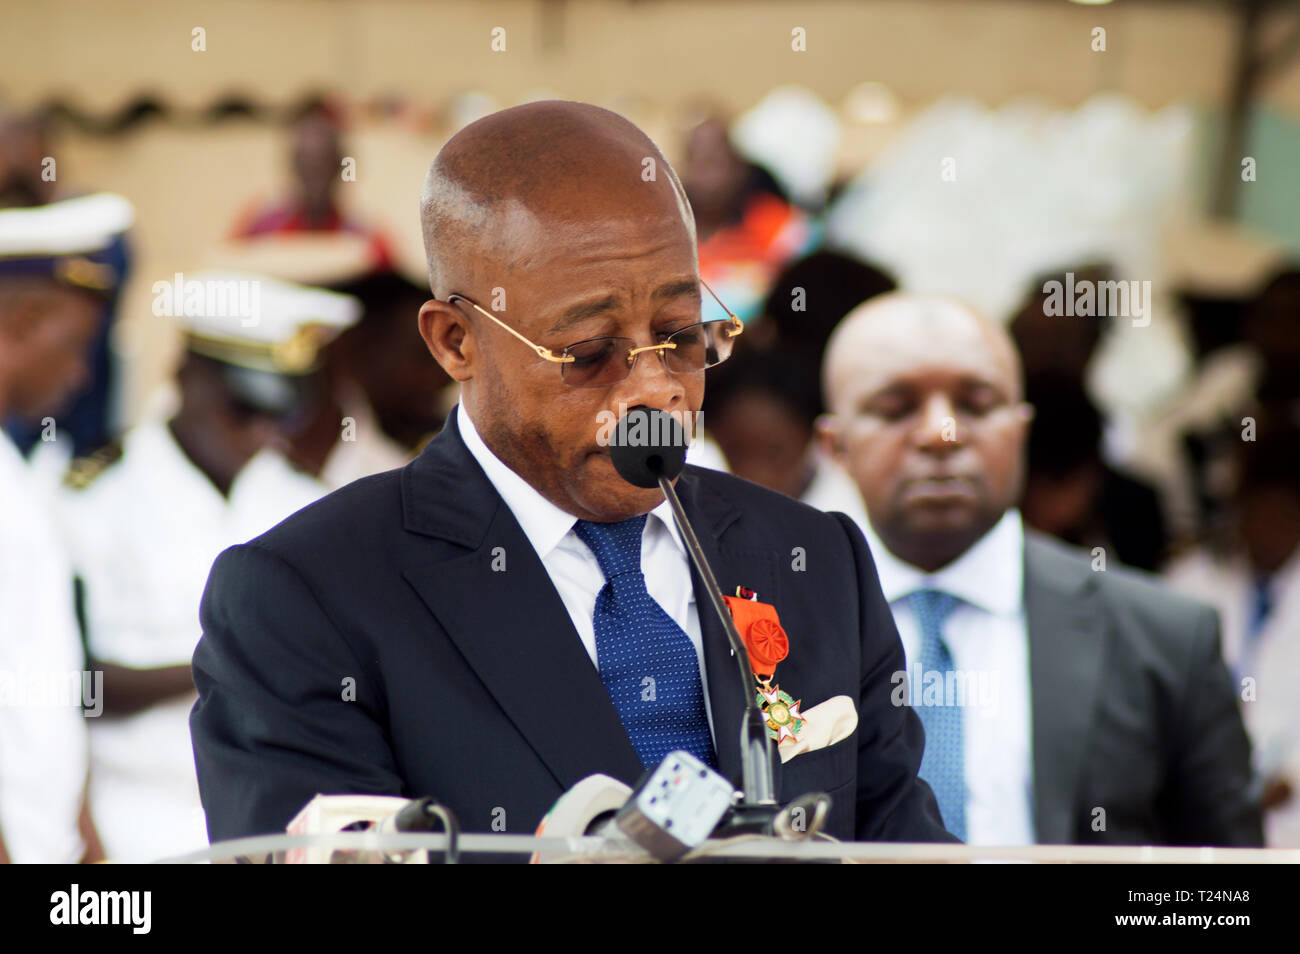 Abidjan, Cote d'Ivoire - August 3, 2017: Congratulatory address to end-cycle extenders of the representative of the sponsor of the ceremony the Presid Stock Photo